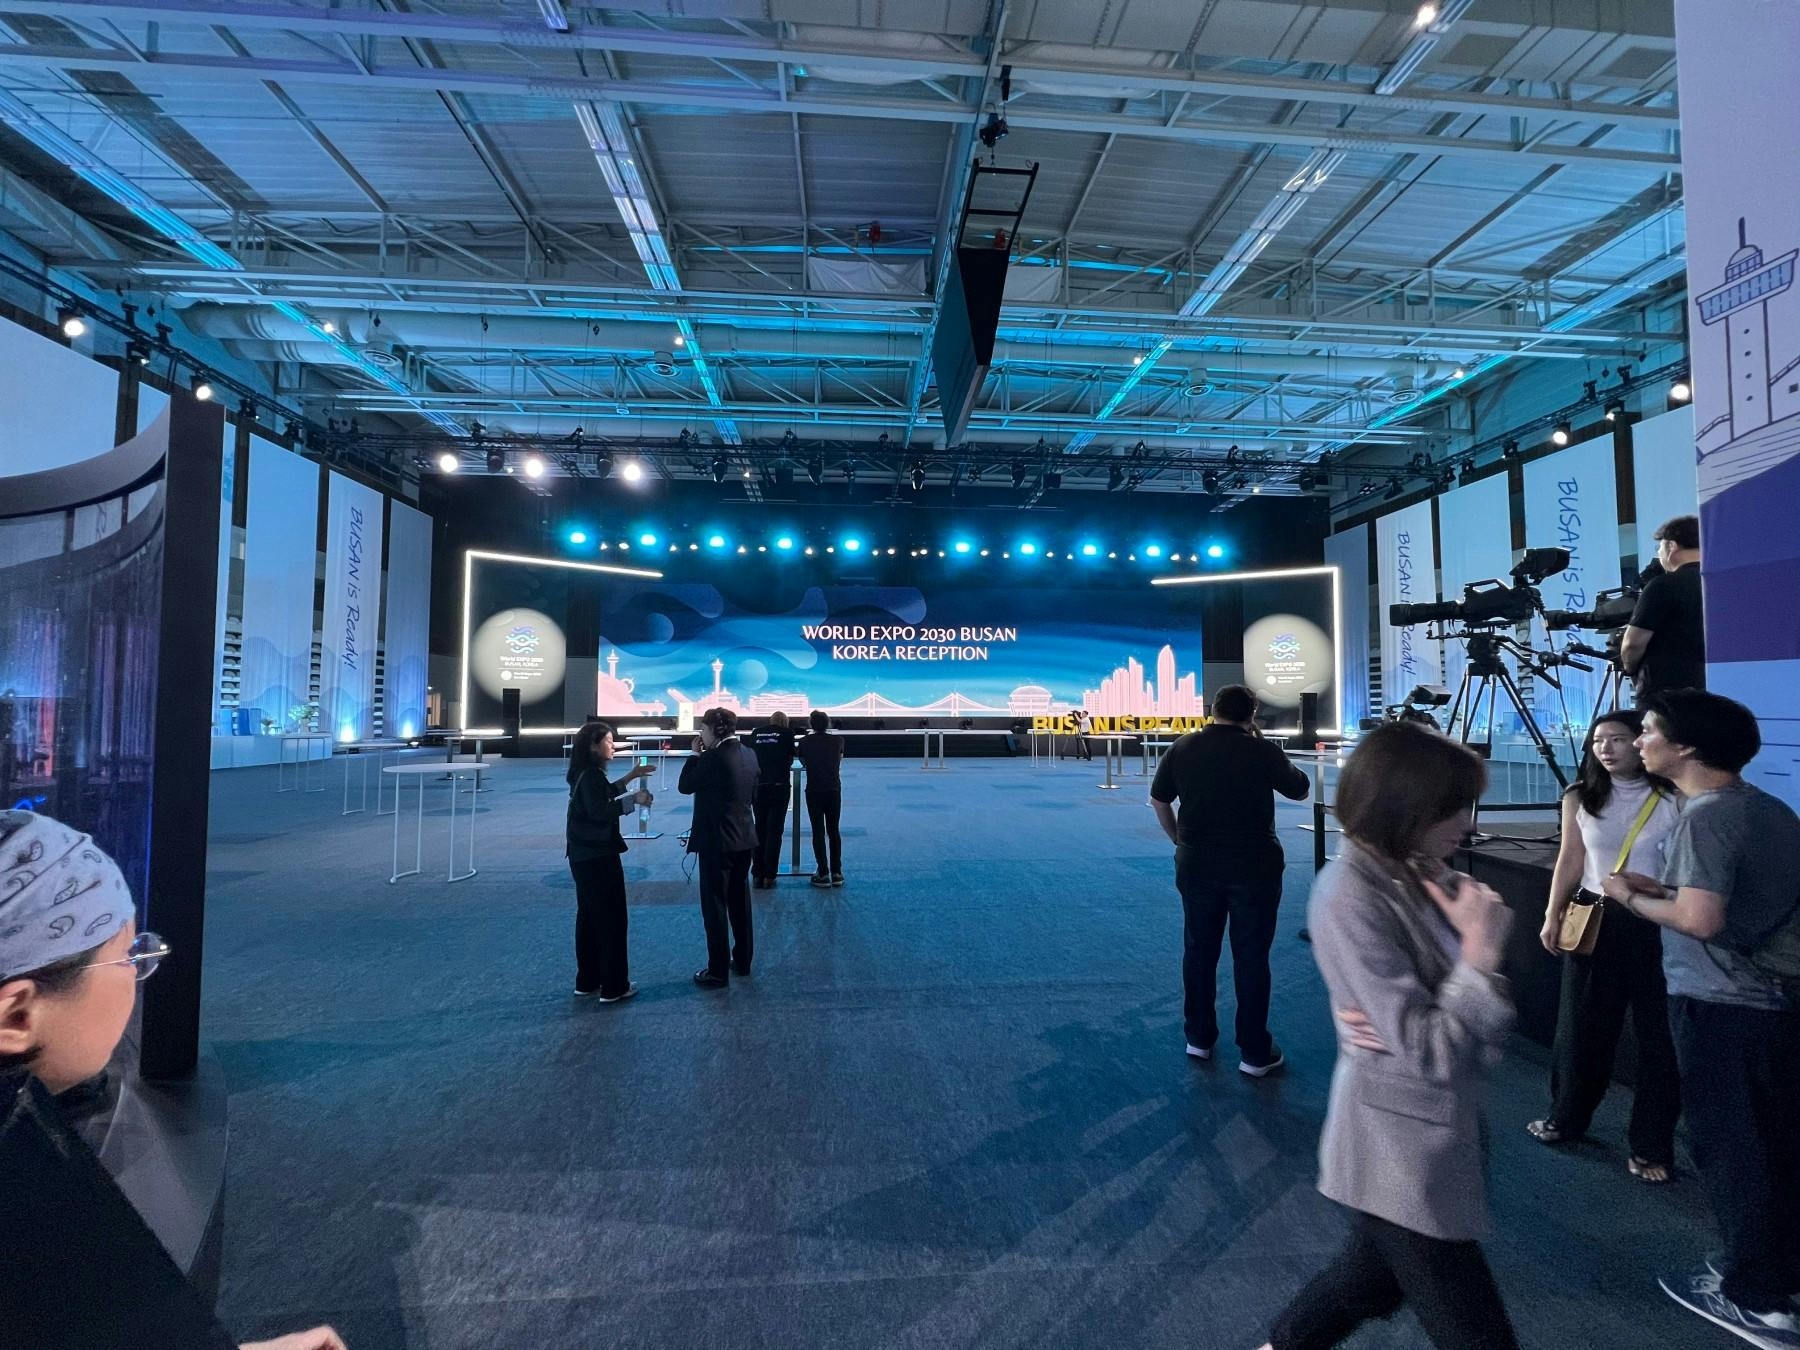 The event hall of the World Expo 2030 Busan was constructed by MDL expo and was hosted over several days.